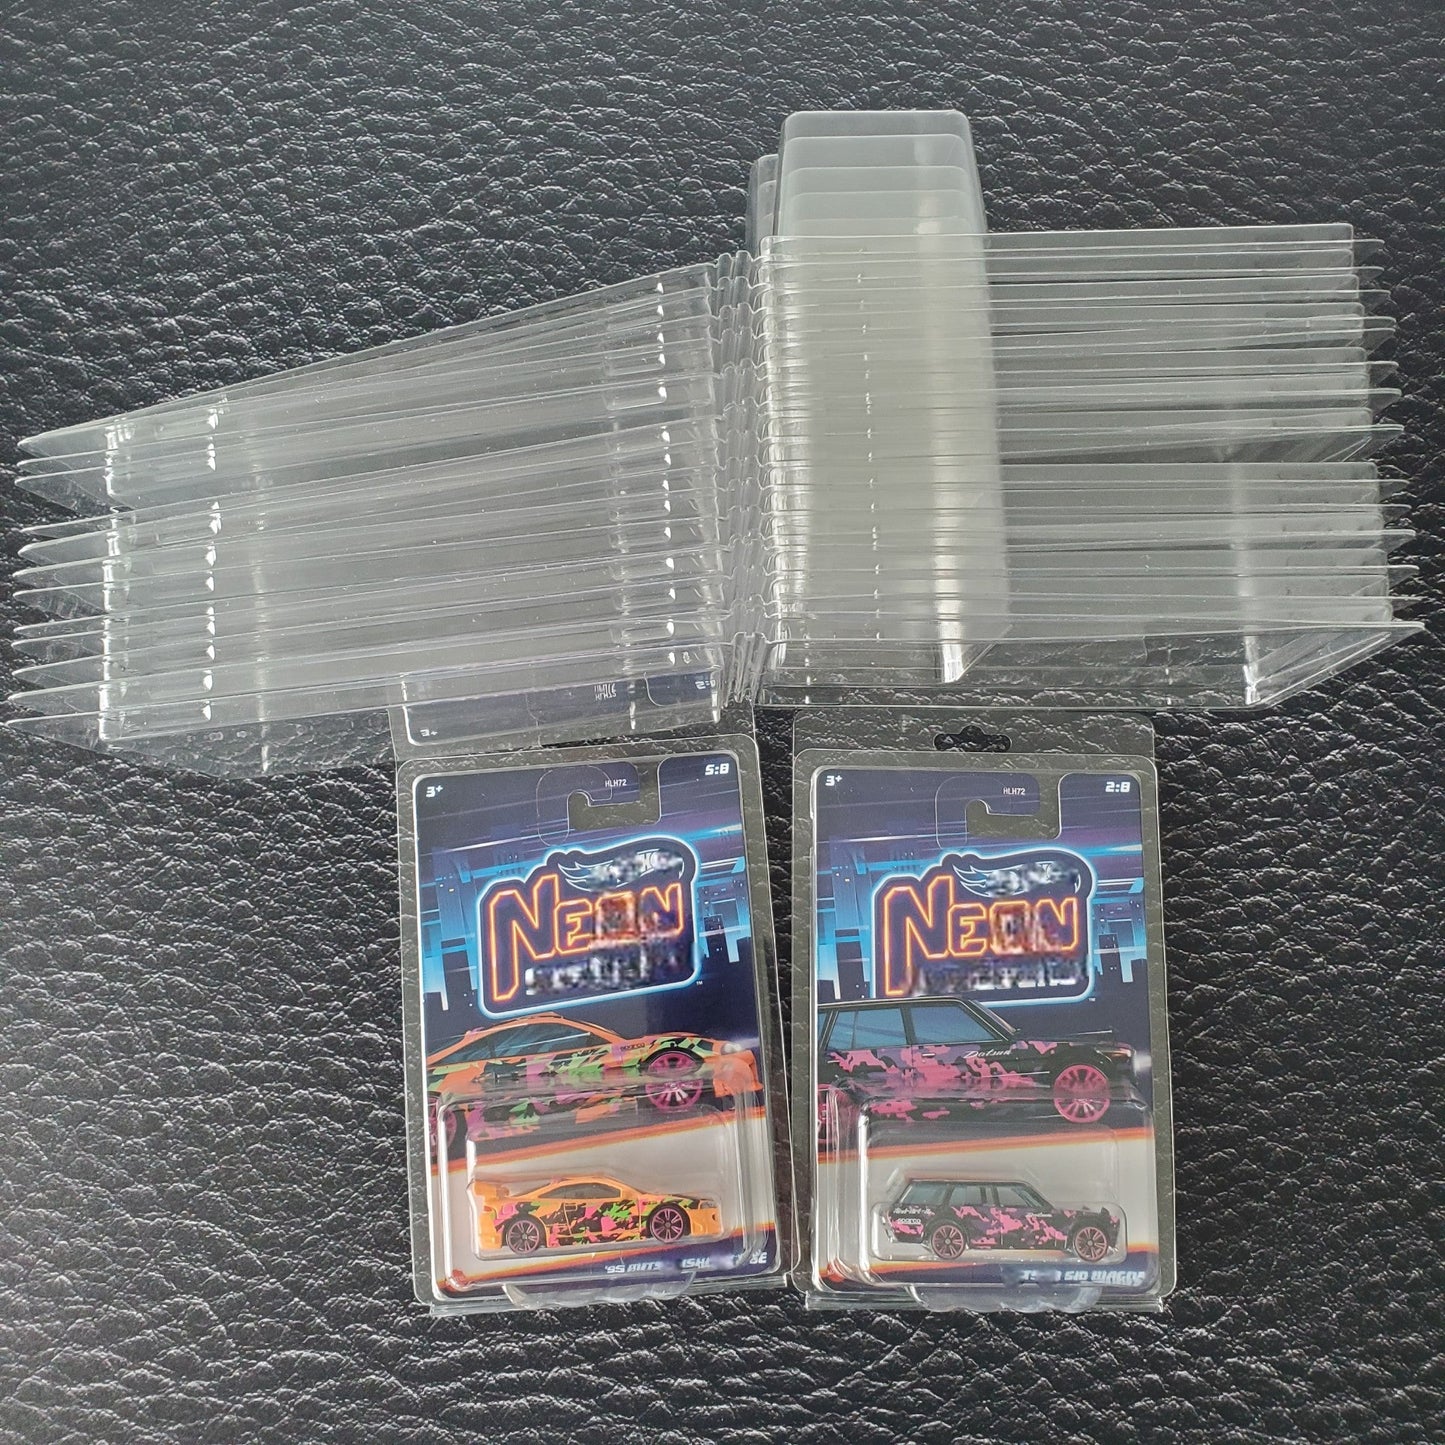 80 Pack Protector Case Clamshell For Hot Wheels Mainline